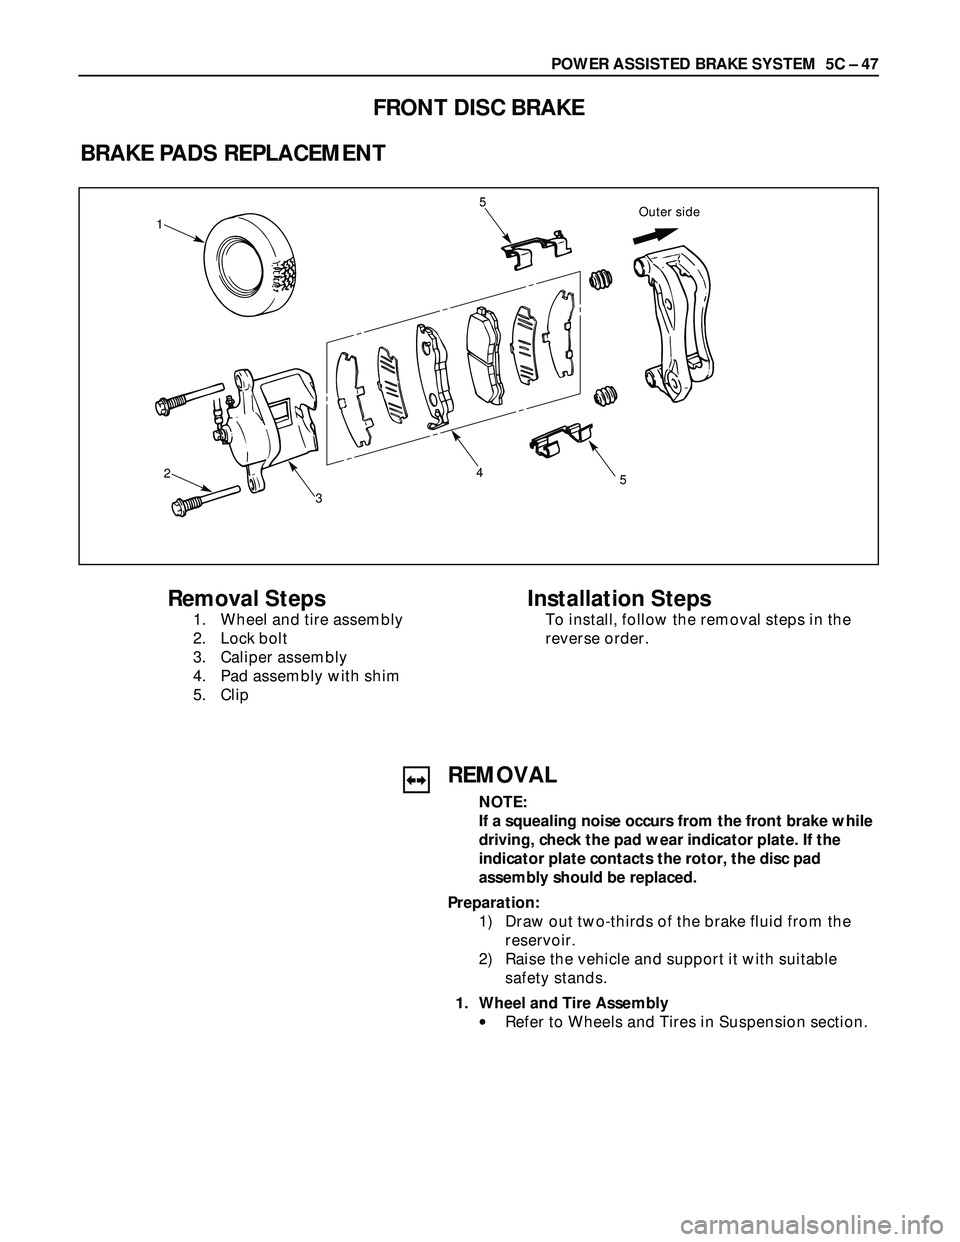 ISUZU TROOPER 1998  Service Repair Manual POWER ASSISTED BRAKE SYSTEM  5C – 47
FRONT DISC BRAKE
BRAKE PADS REPLACEMENT
Outer side1
2
3
45
5
Removal Steps
1. Wheel and tire assembly
2. Lock bolt
3. Caliper assembly
4. Pad assembly with shim
